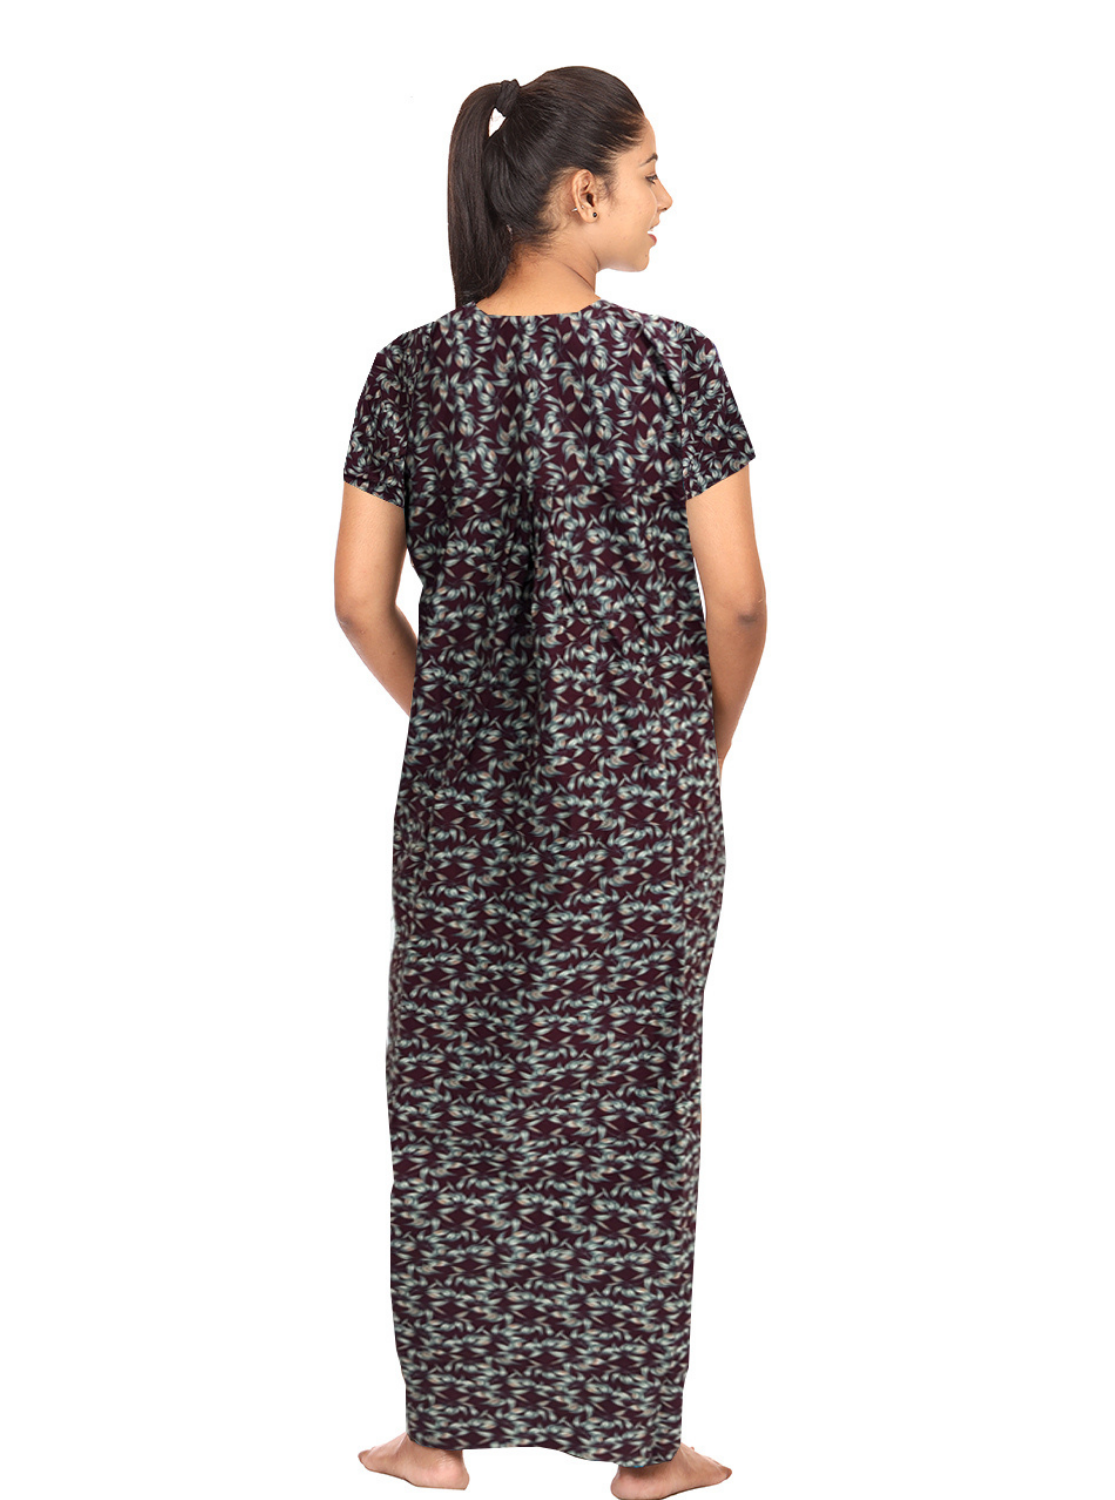 MANGAI Printed Cotton PLEATED Model 3XL Size Nighties - Fancy Neck | With Side Pocket |Shrinkage Free Nighties | Trendy Collection's for Trendy Women's